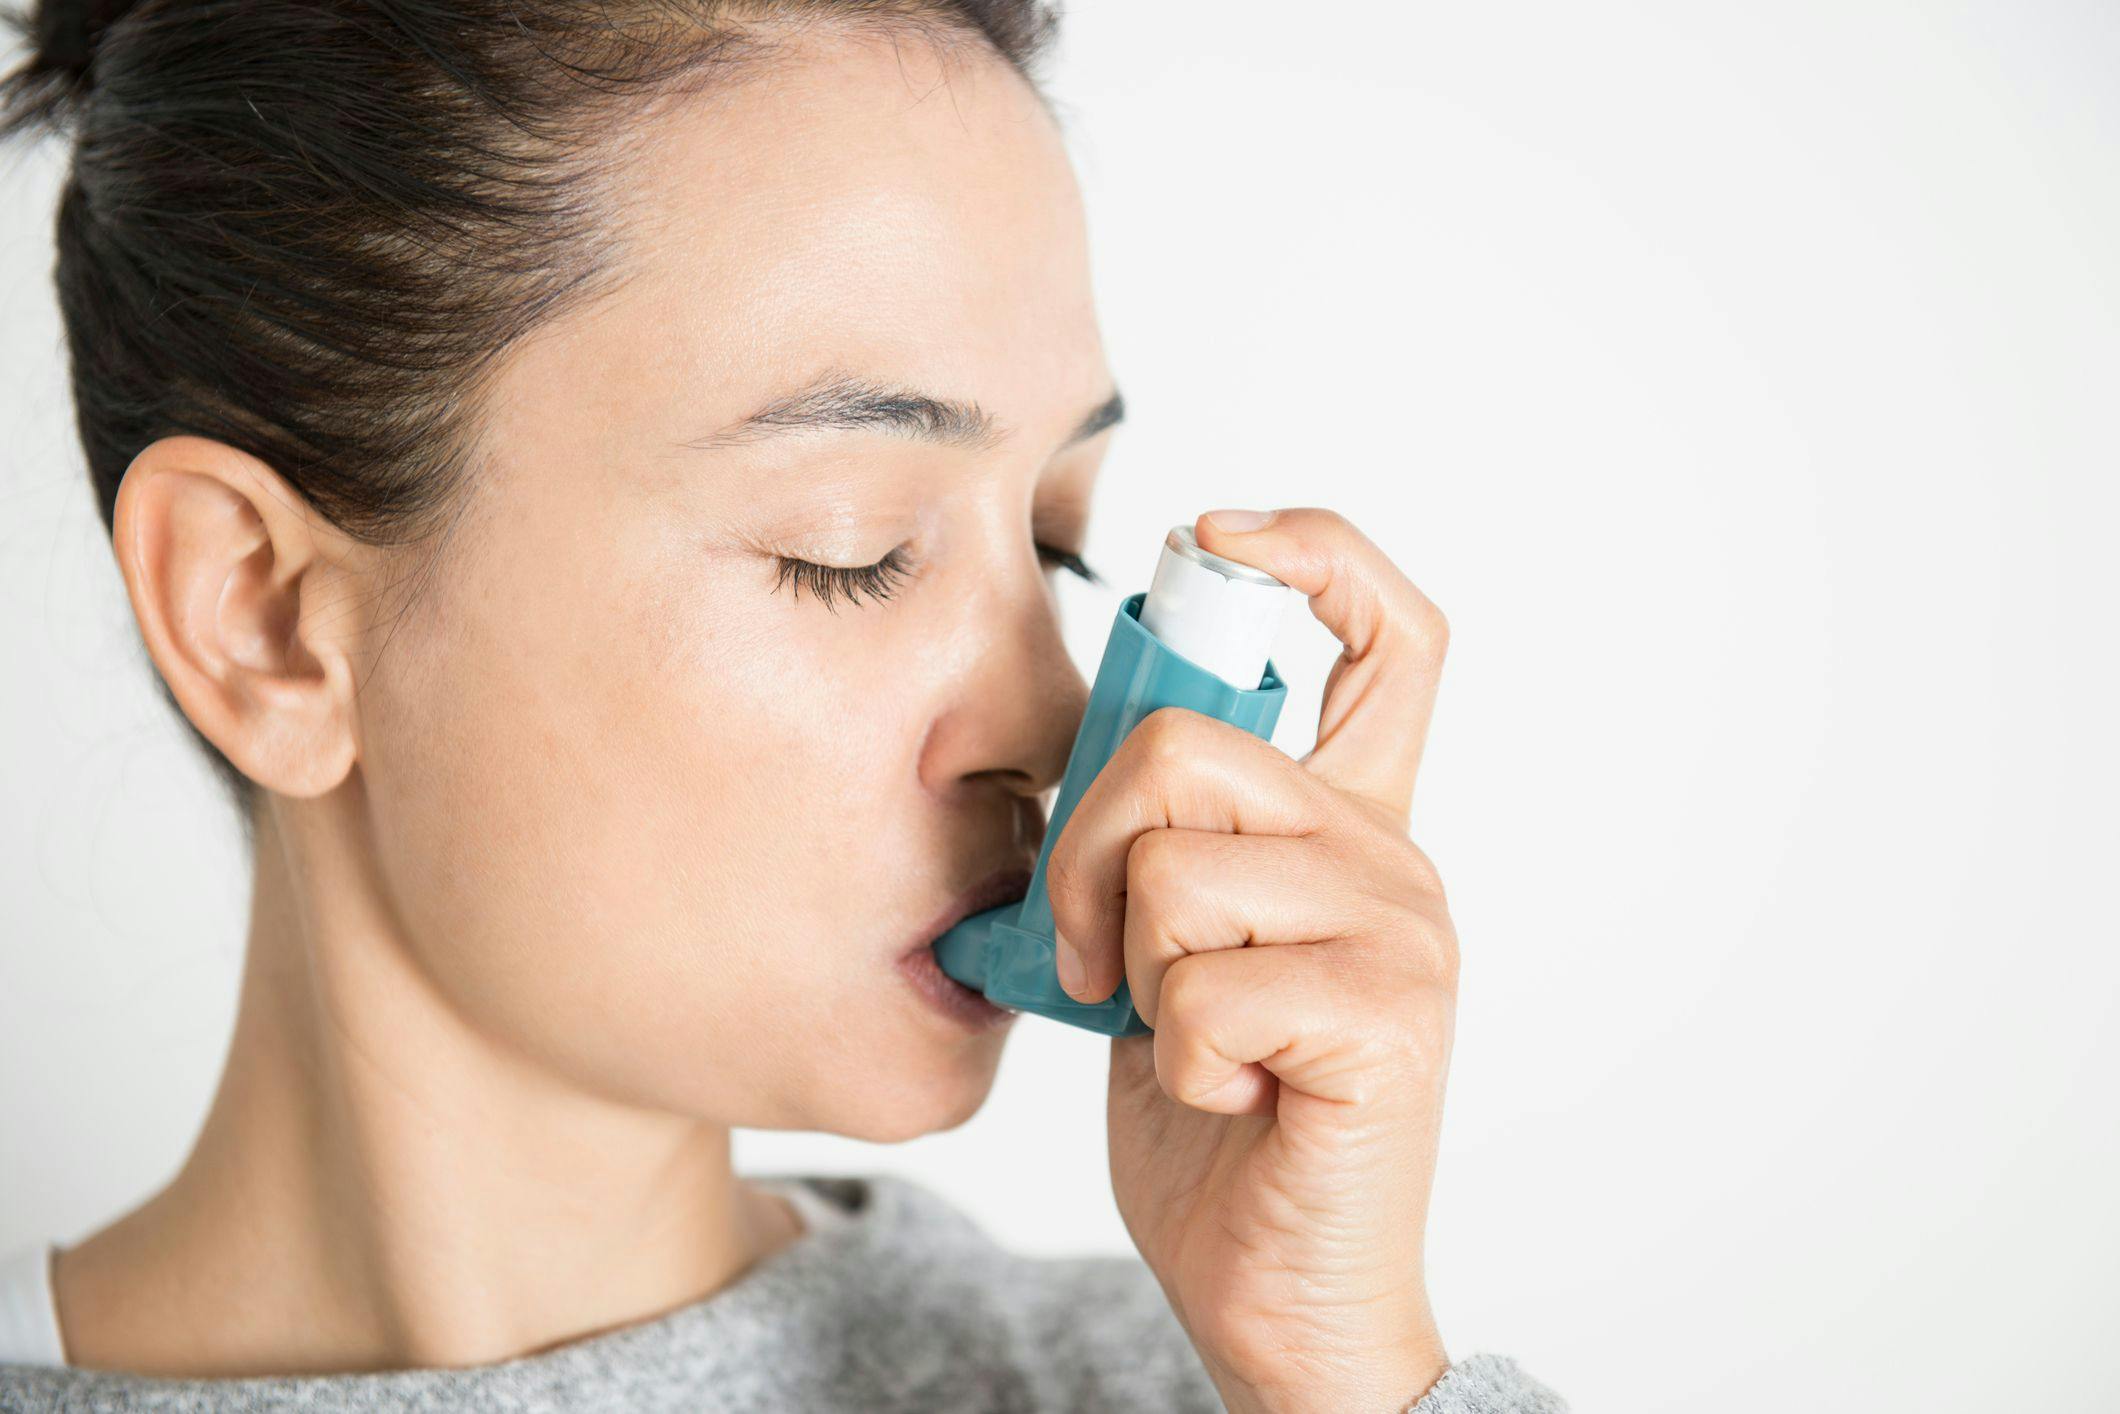 FDA Approves Trelegy Ellipta as First Single Inhaler Triple Therapy for Asthma